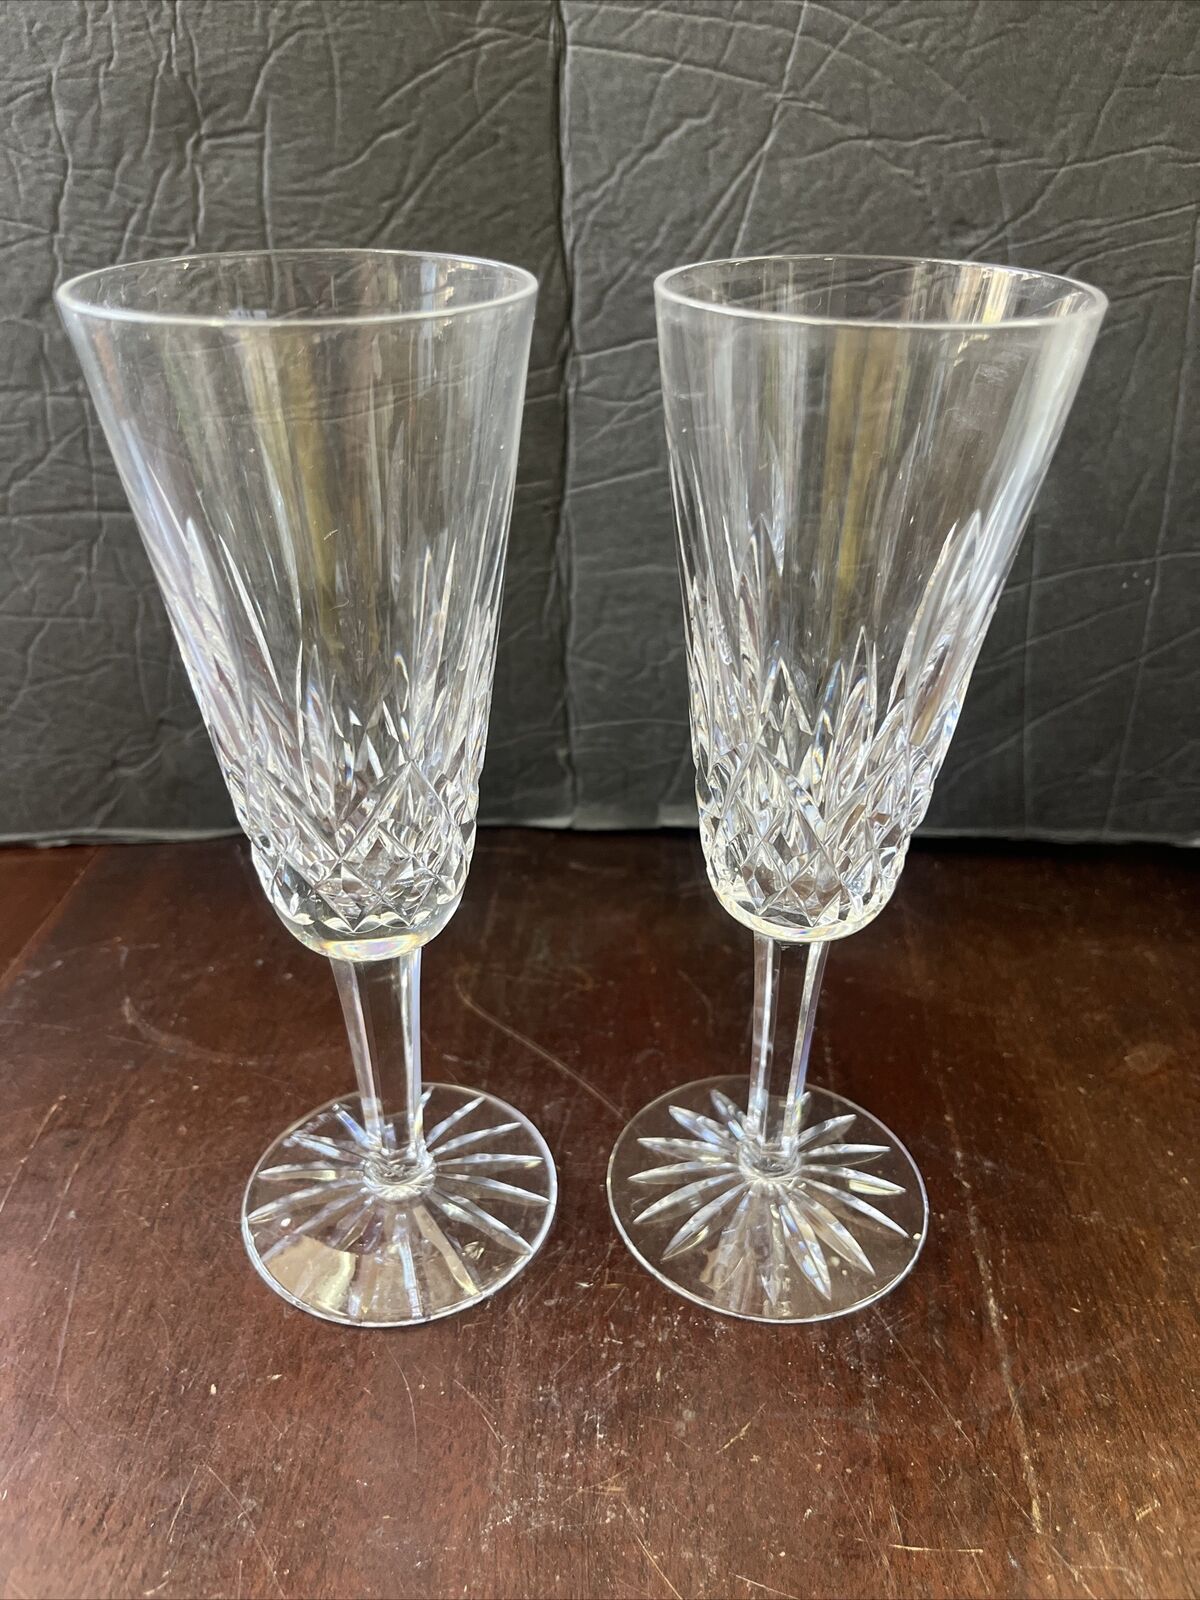 2 Waterford Ireland Lismore Crystal 7.25” Champagne Flutes Stems Glasses Signed 